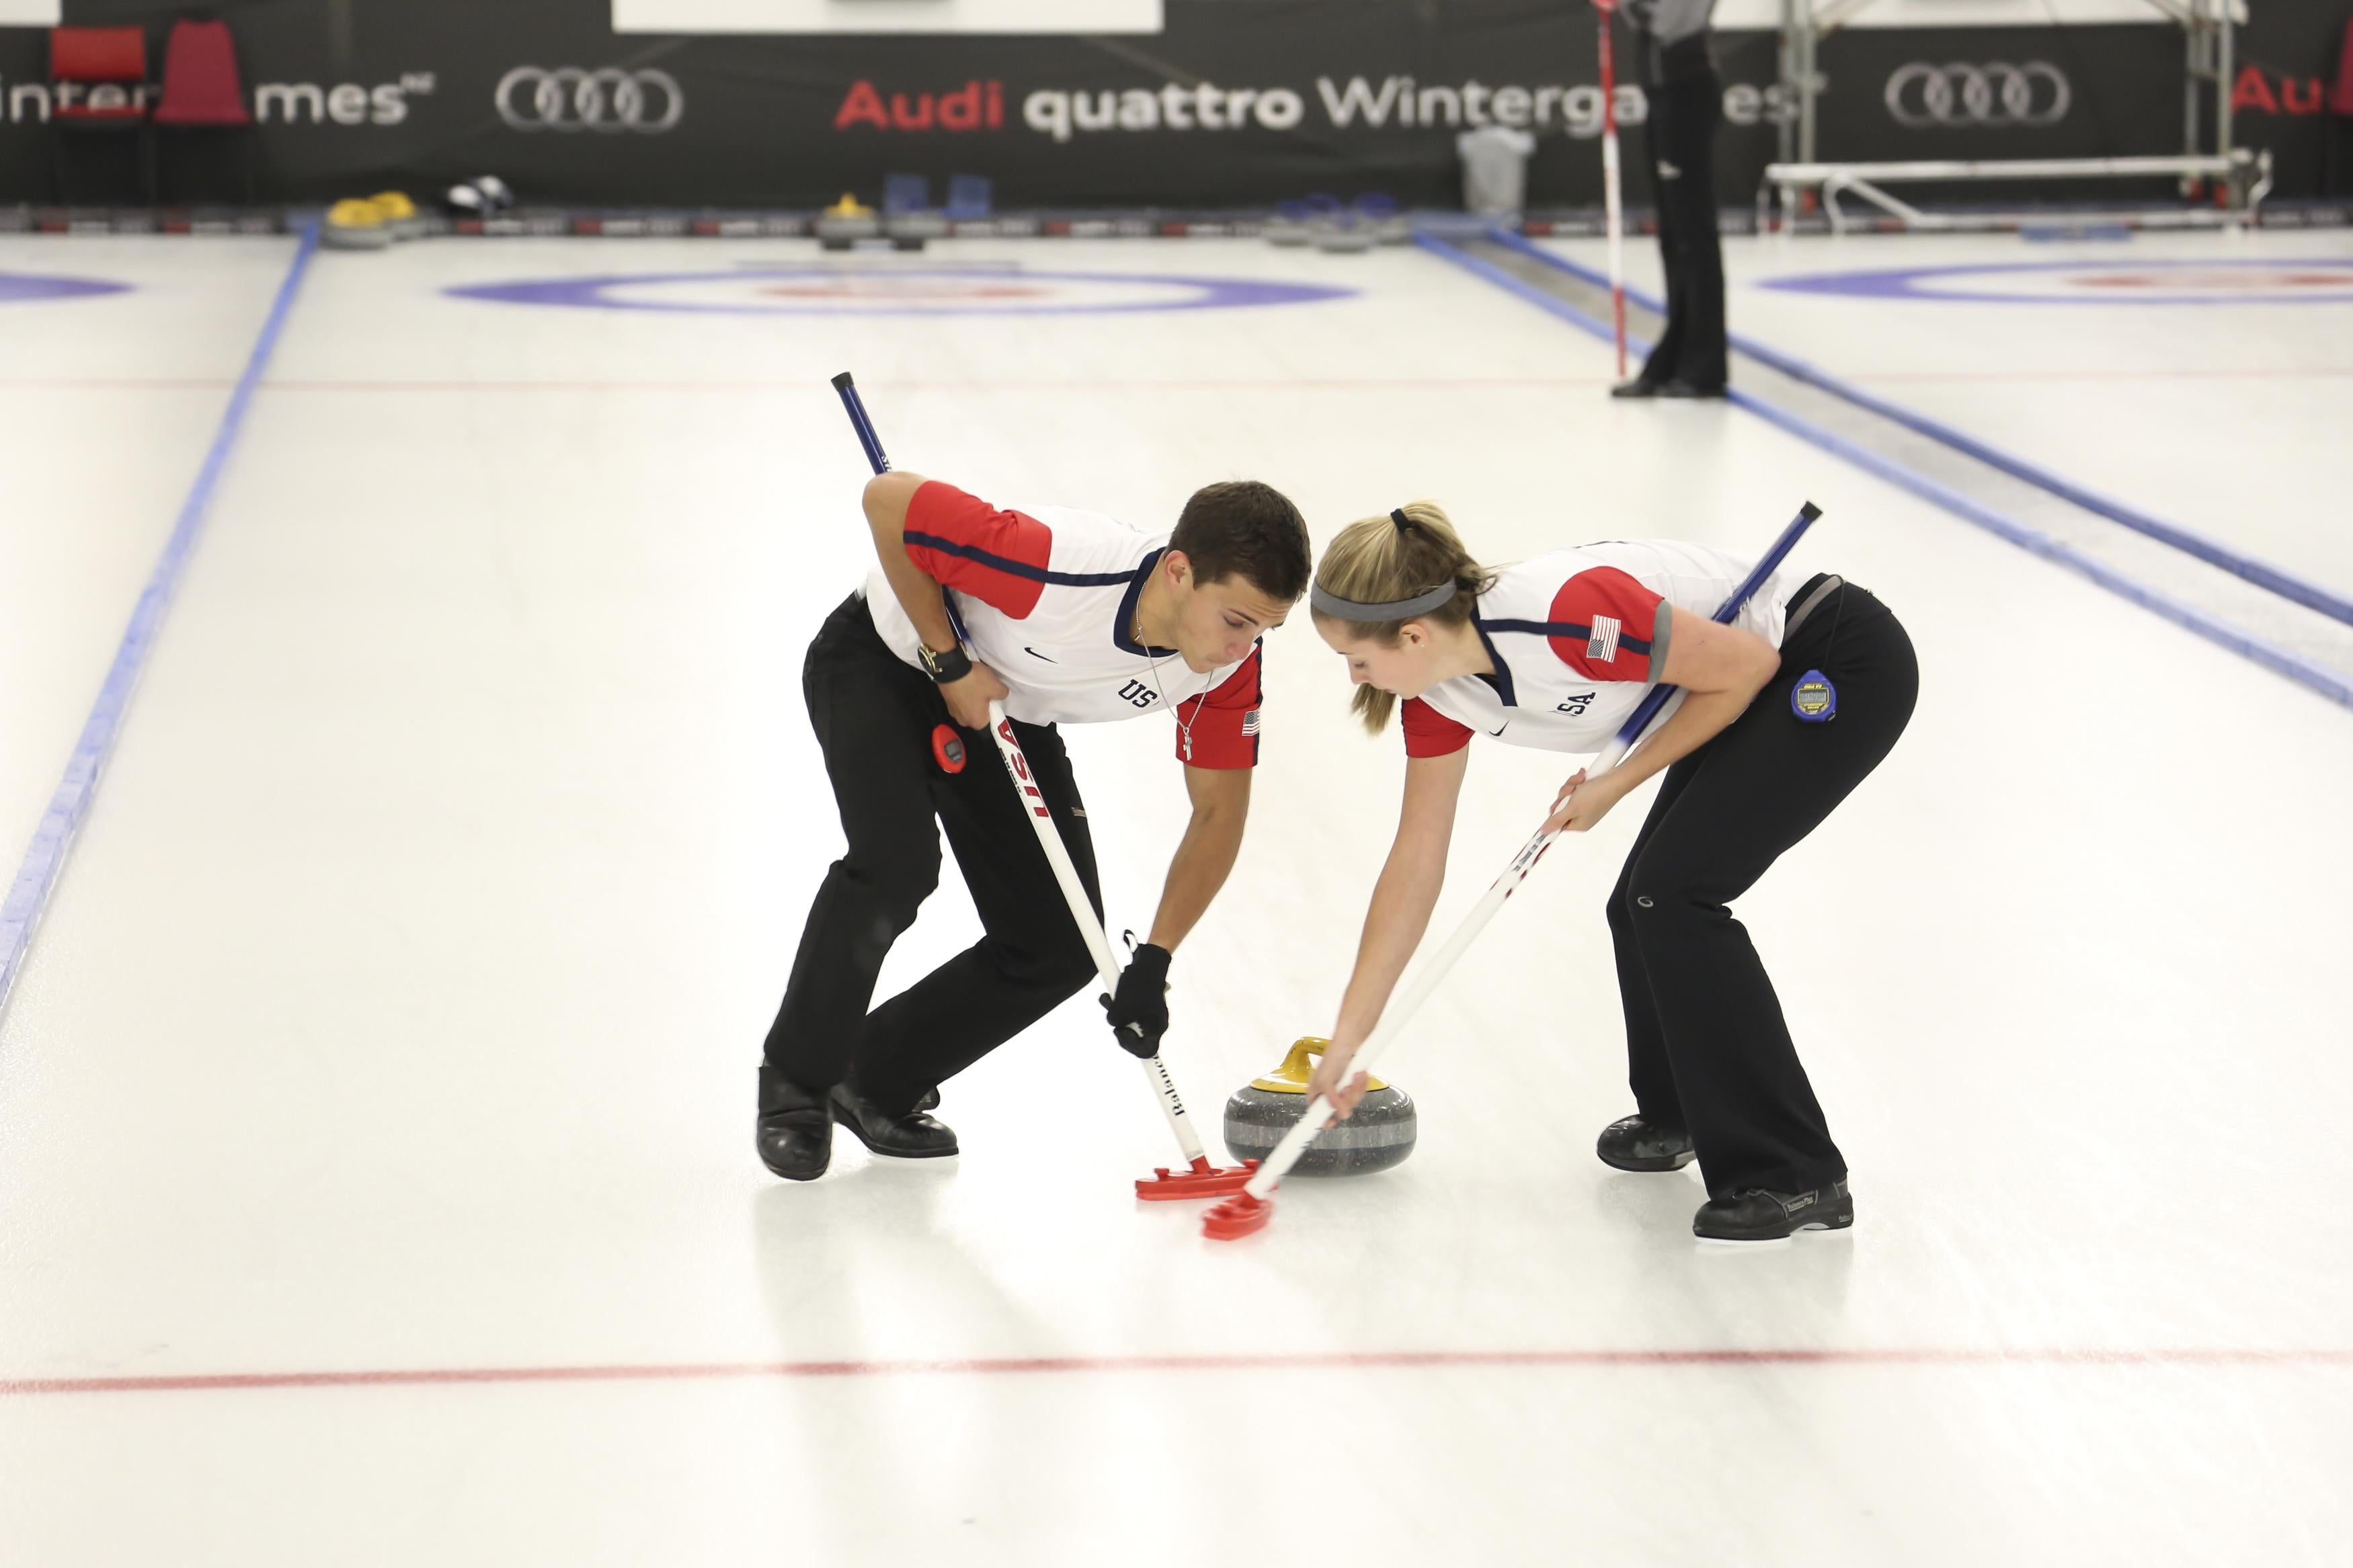 NASEBY, NEW ZEALAND - AUGUST 27:  Sarah Anderson & Korey Dropkin of USA working hard on their brooms in the Curling Mixed Doubles Finals during the Winter Games NZ at Naseby Curling Rink on August 27, 2015 in Naseby, New Zealand.  (Photo by Neil Kerr/Getty Images)